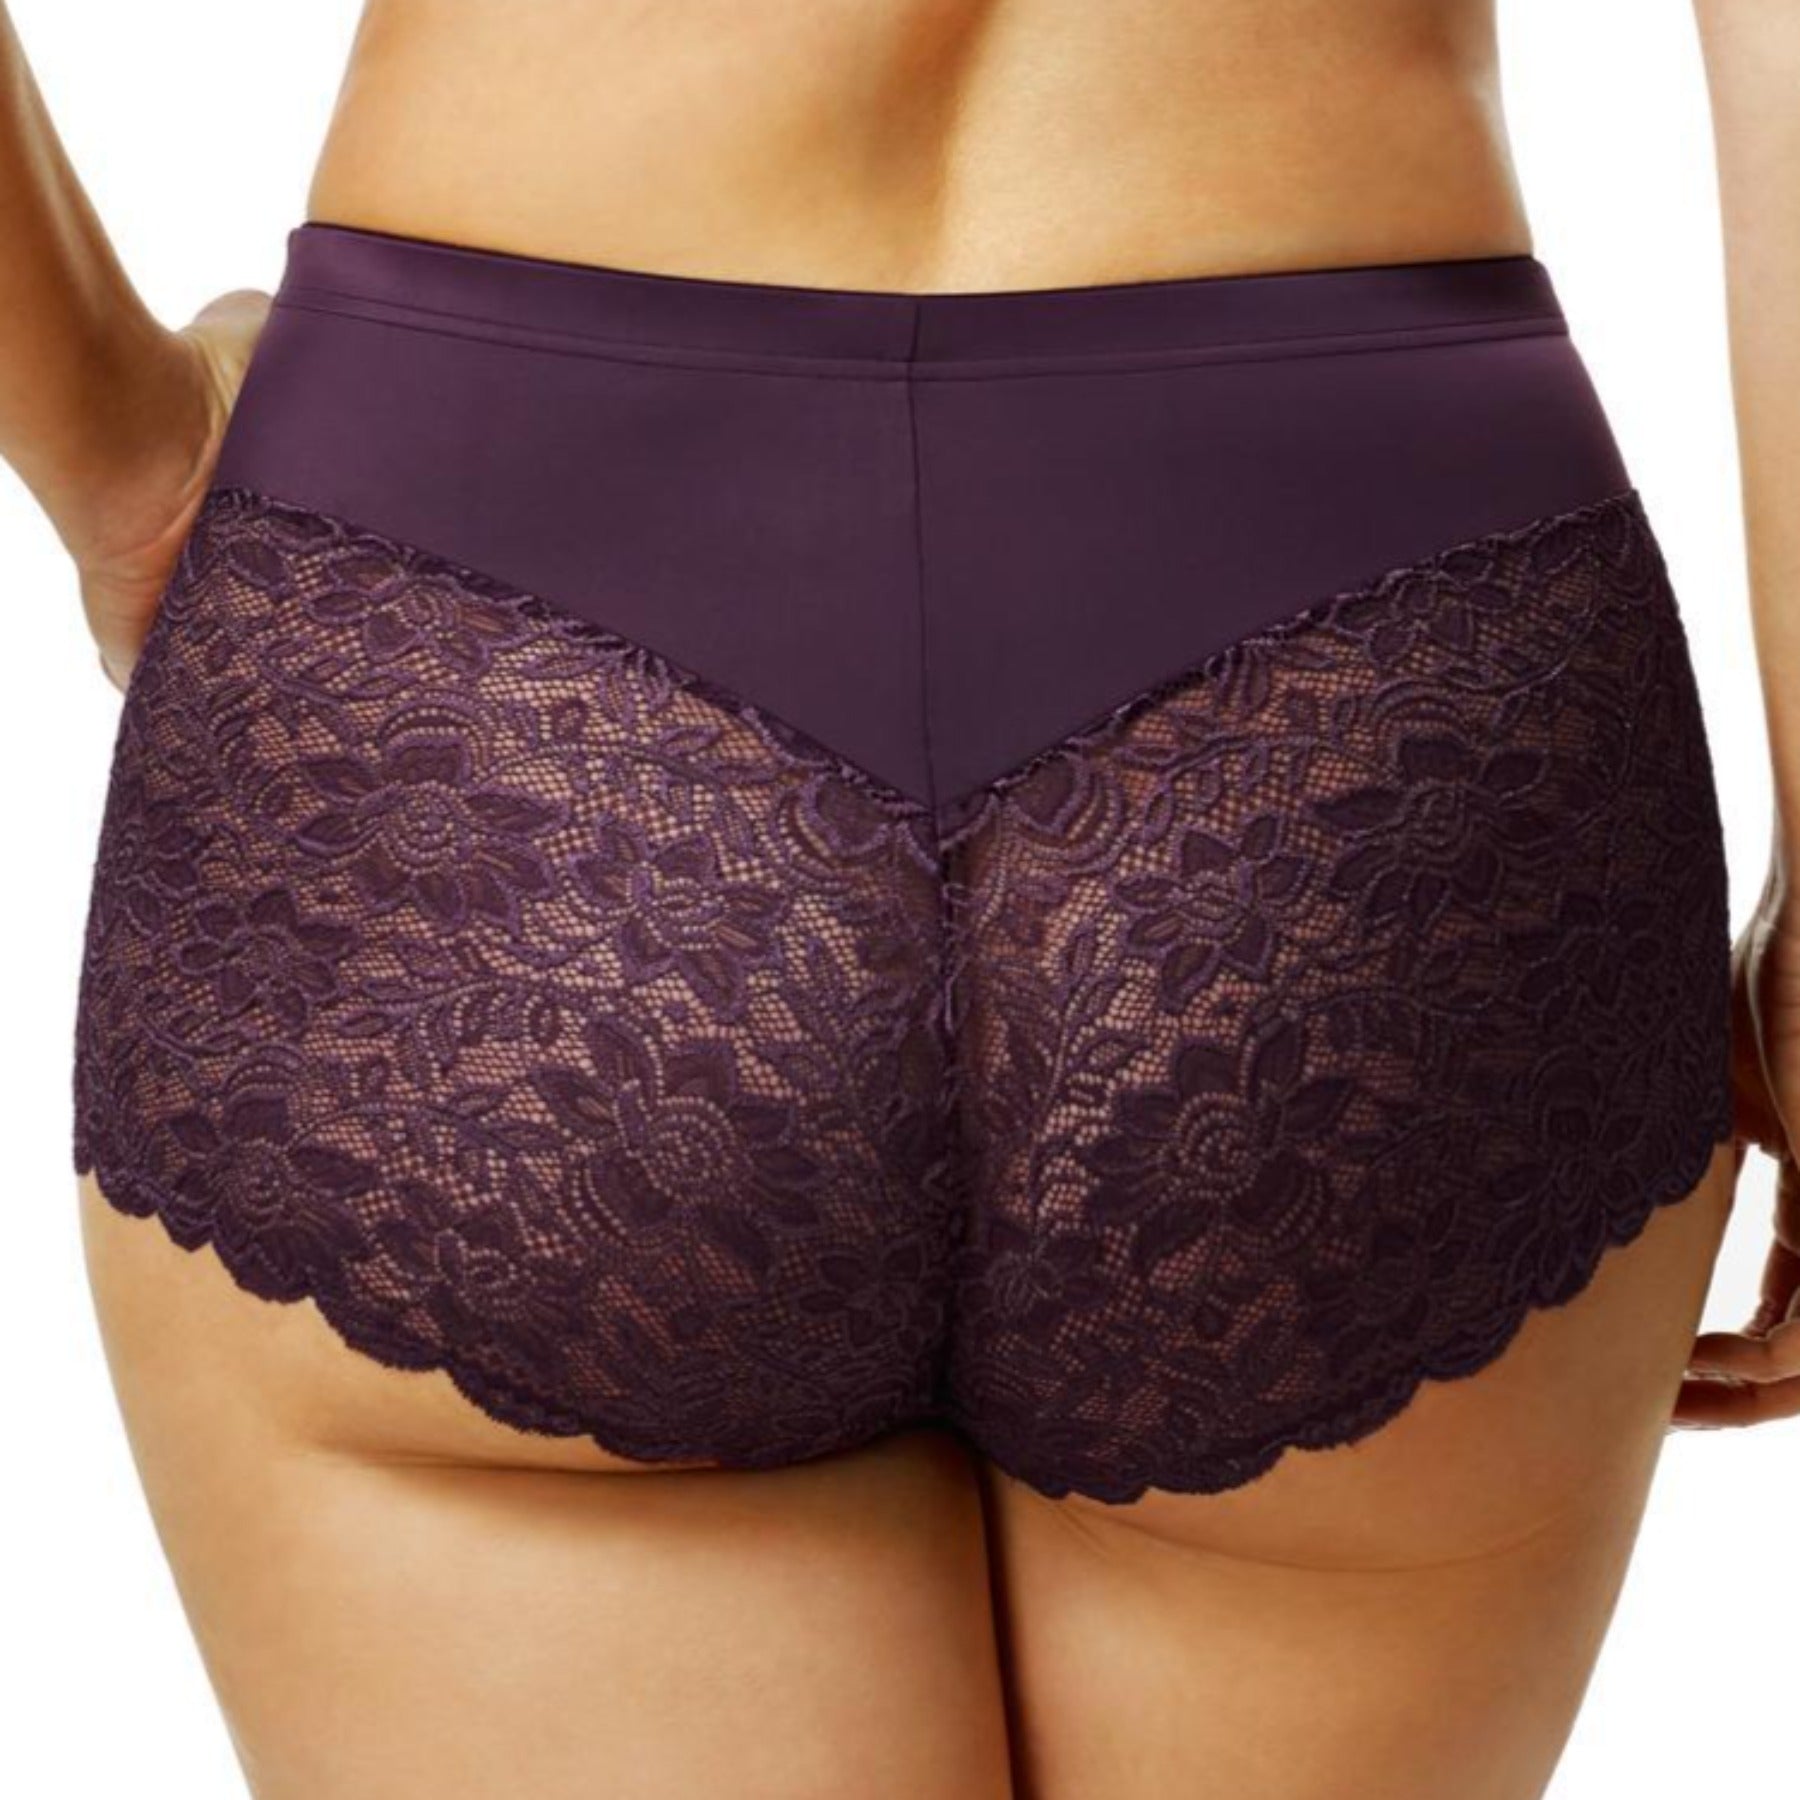 Cheeky Stretch Lace Panty 3311 - Plum